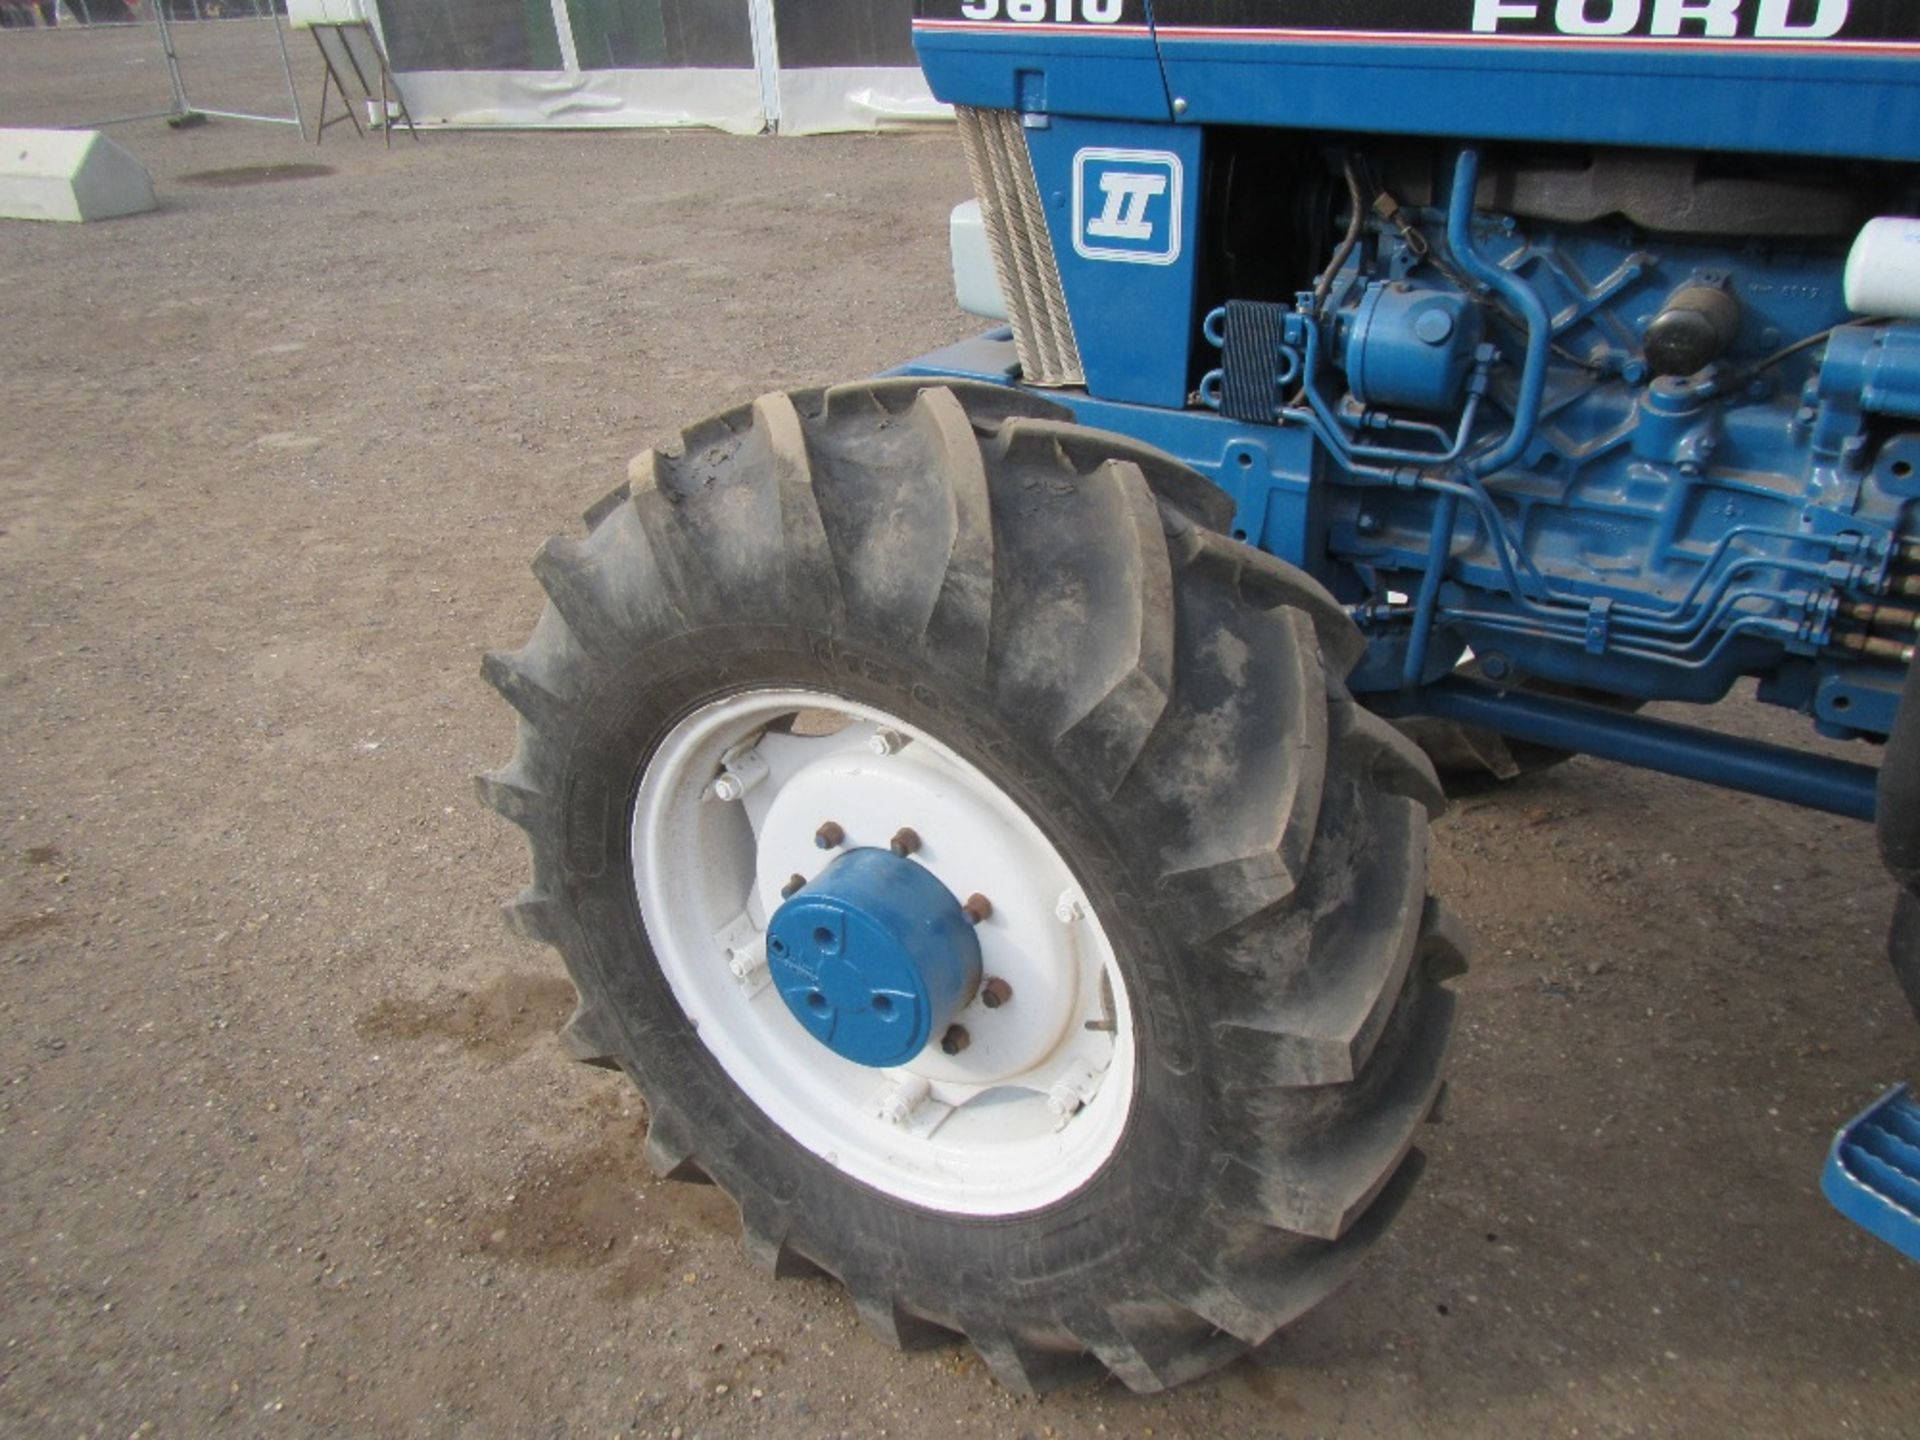 Ford 5610 Series 2 4wd Tractor c/w floor gear change, Q cab - Image 10 of 16